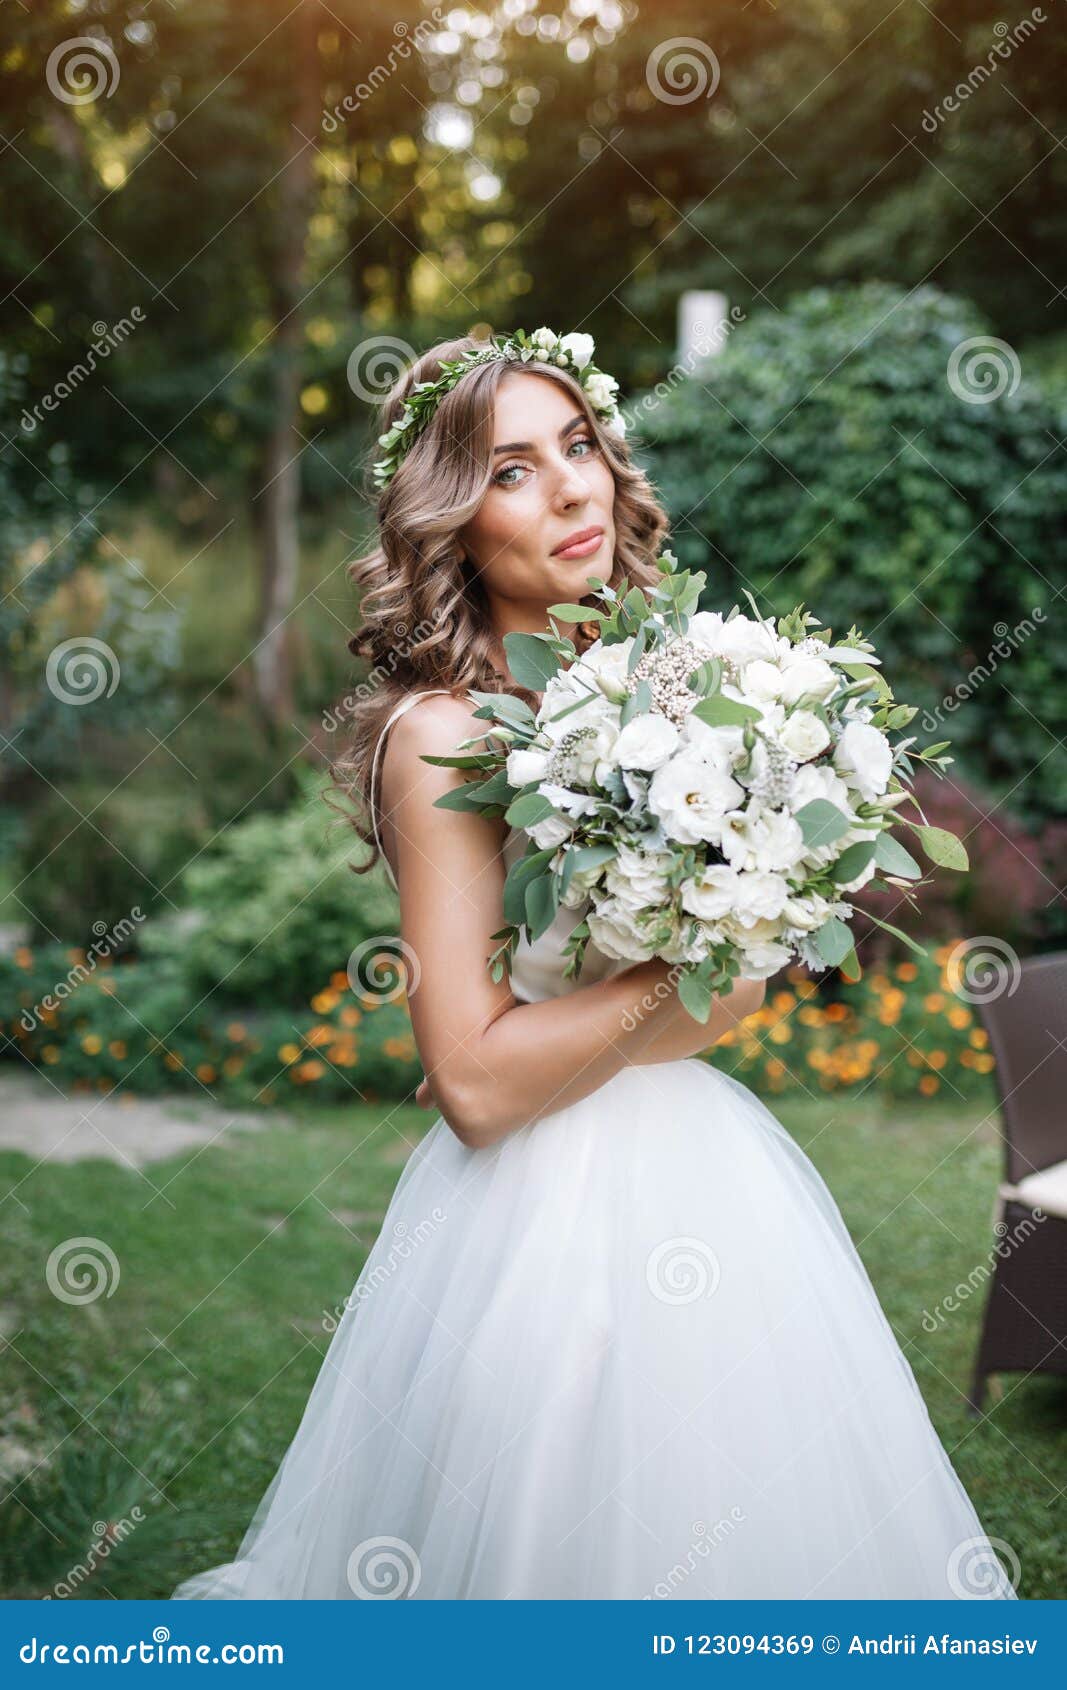 A Cute Curly Woman In A White Wedding Dress With A Wedding